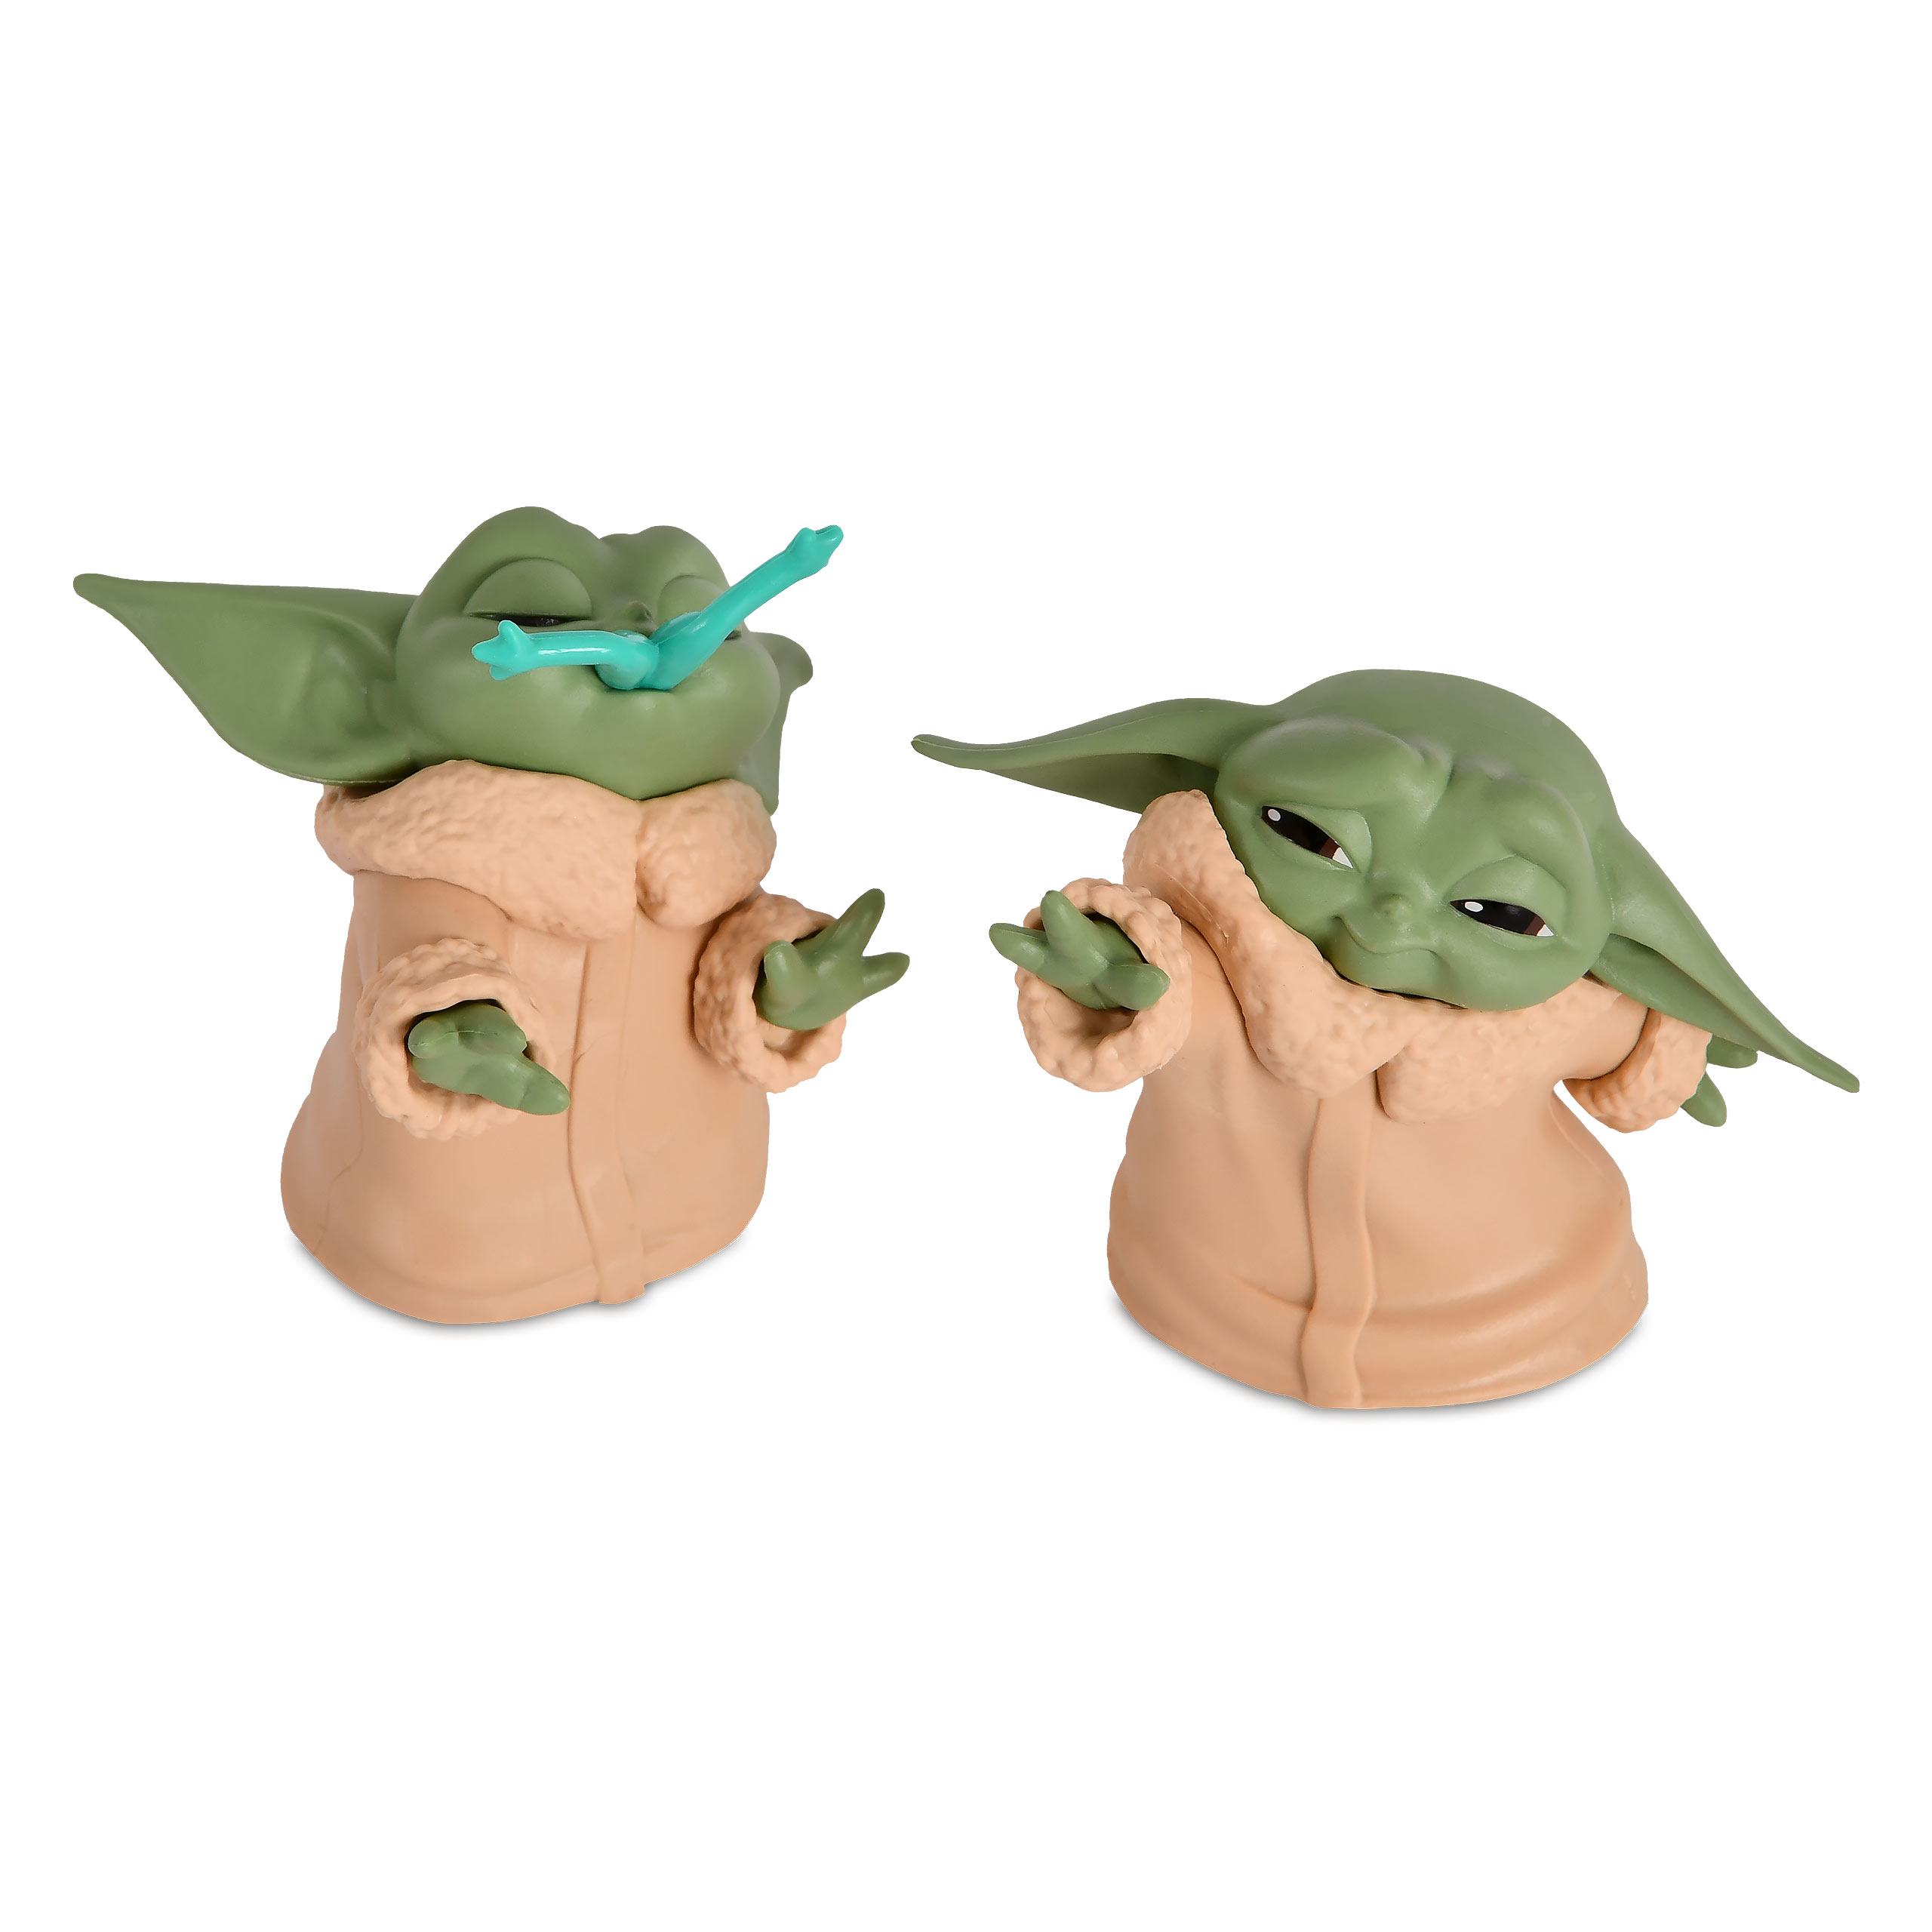 The Child with Frog and Force Pose Mini Figure Set - Star Wars The Mandalorian